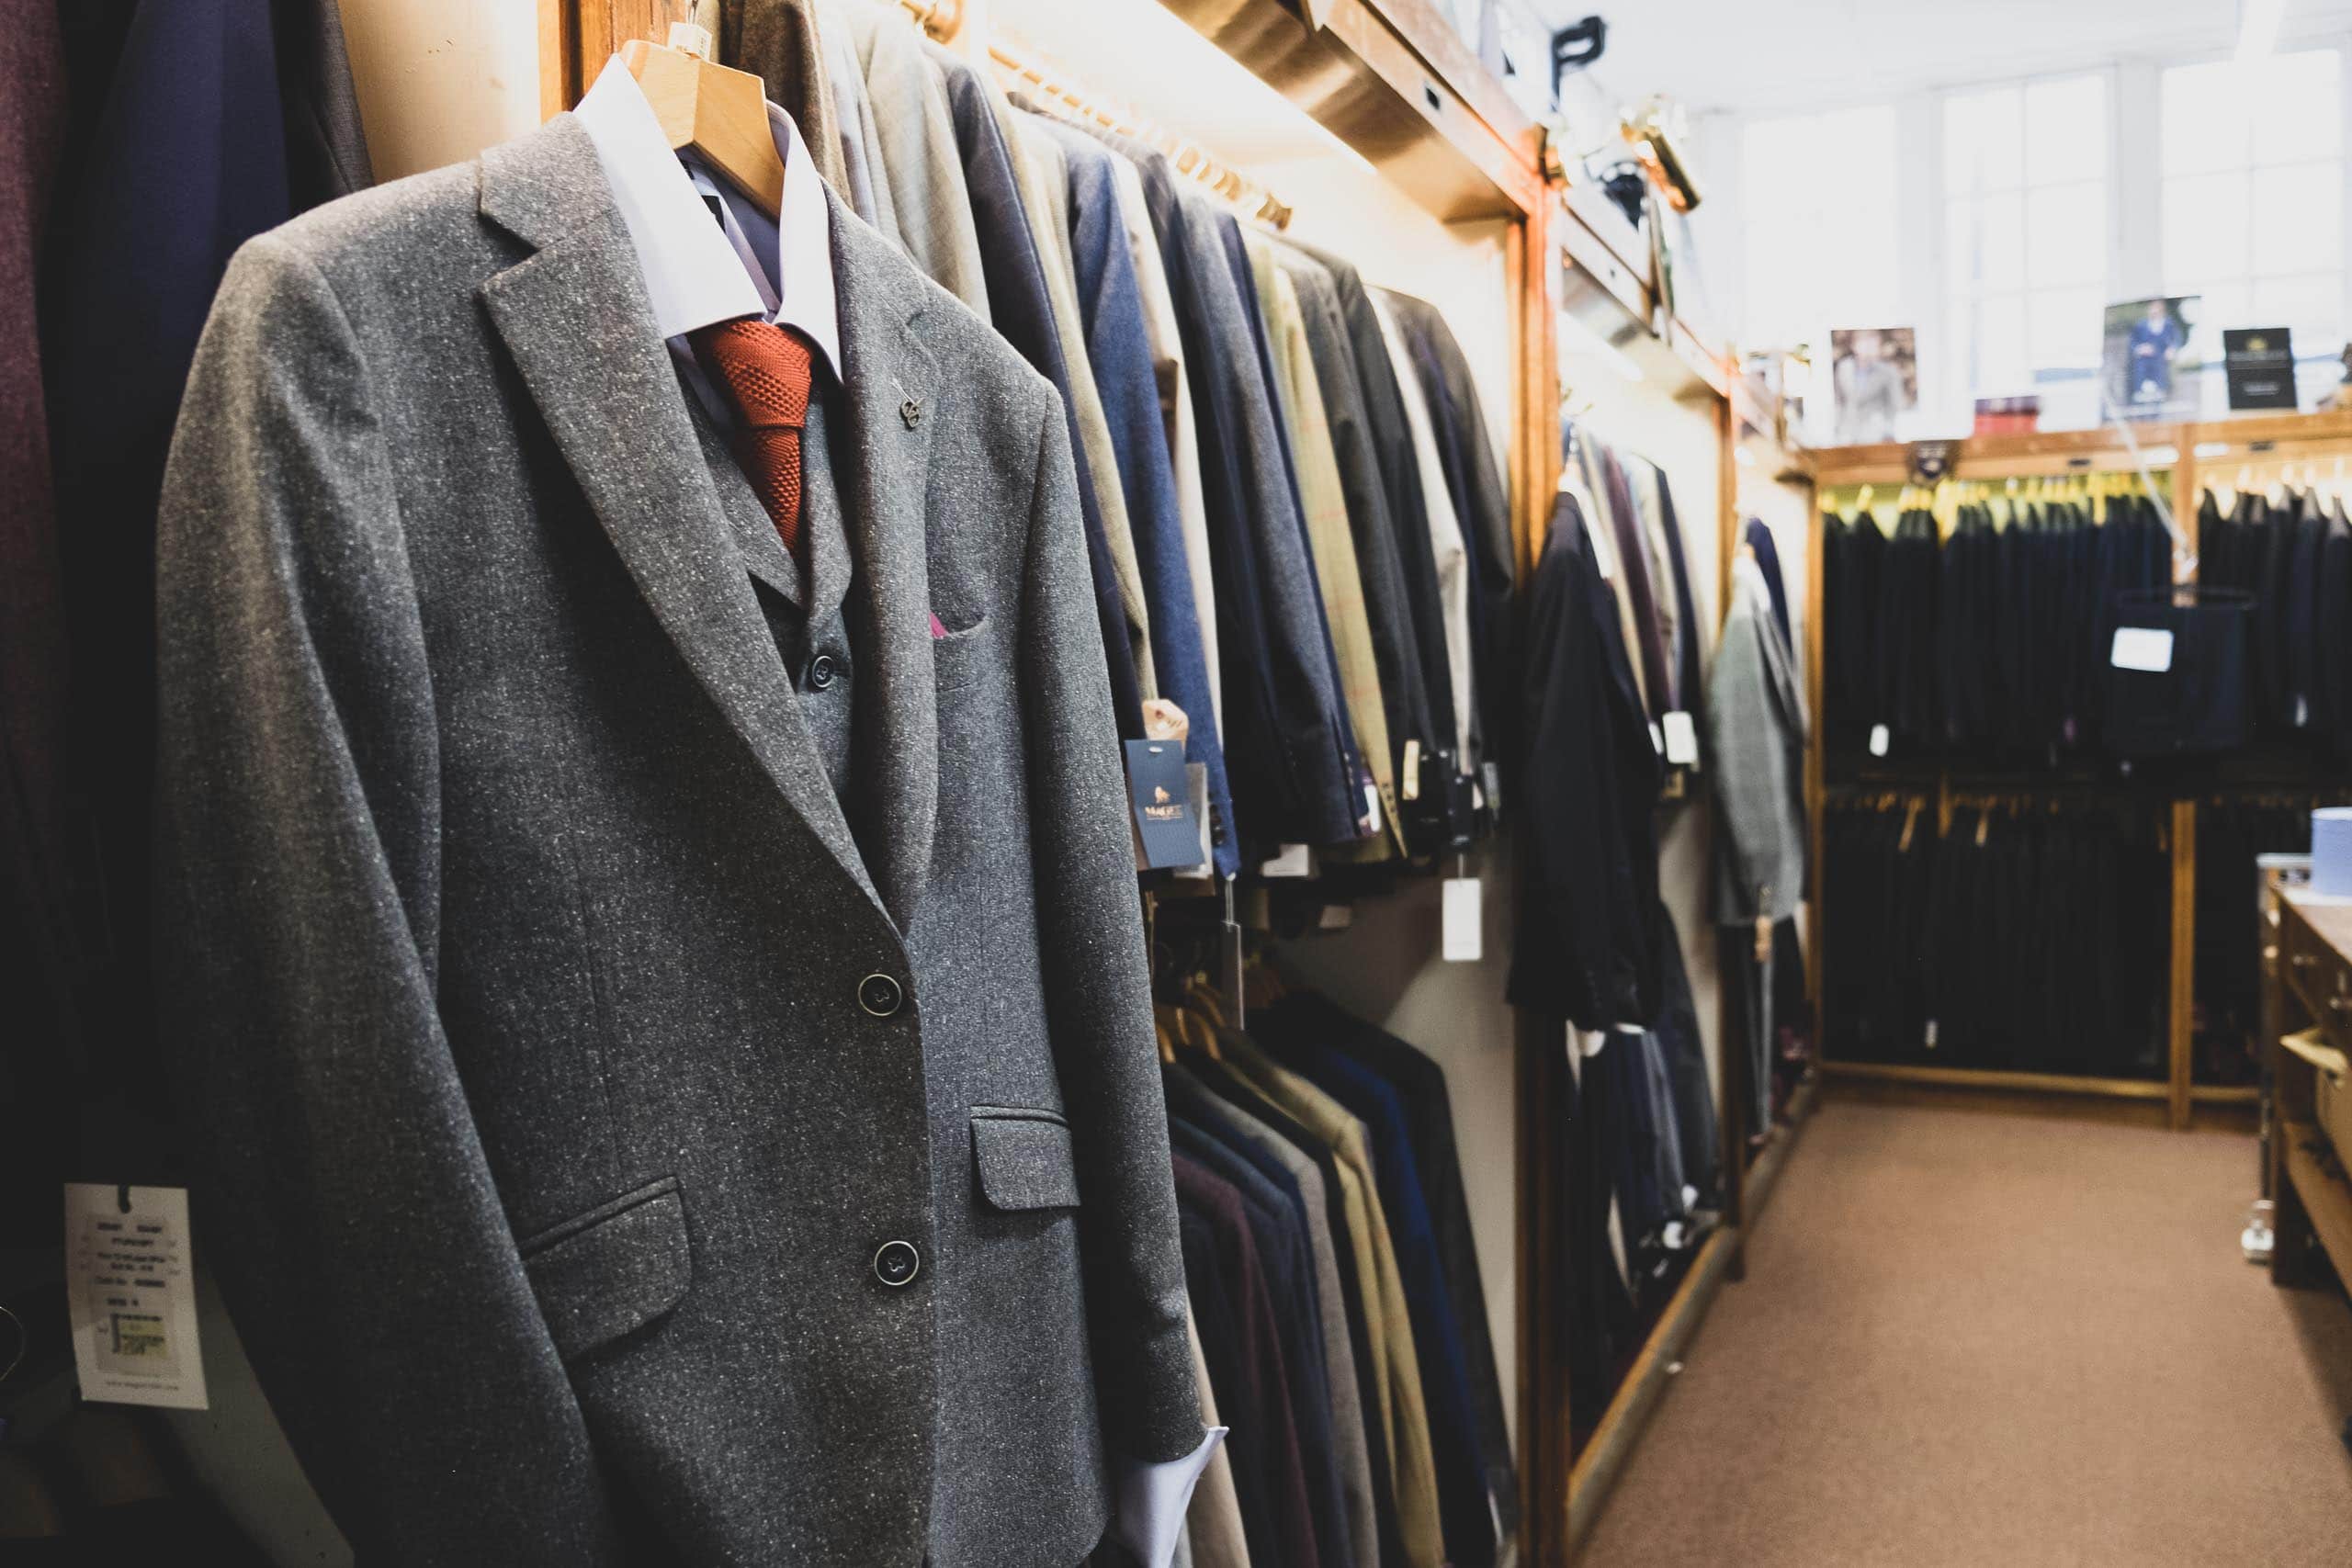 Suits on display in Walters of Oxford